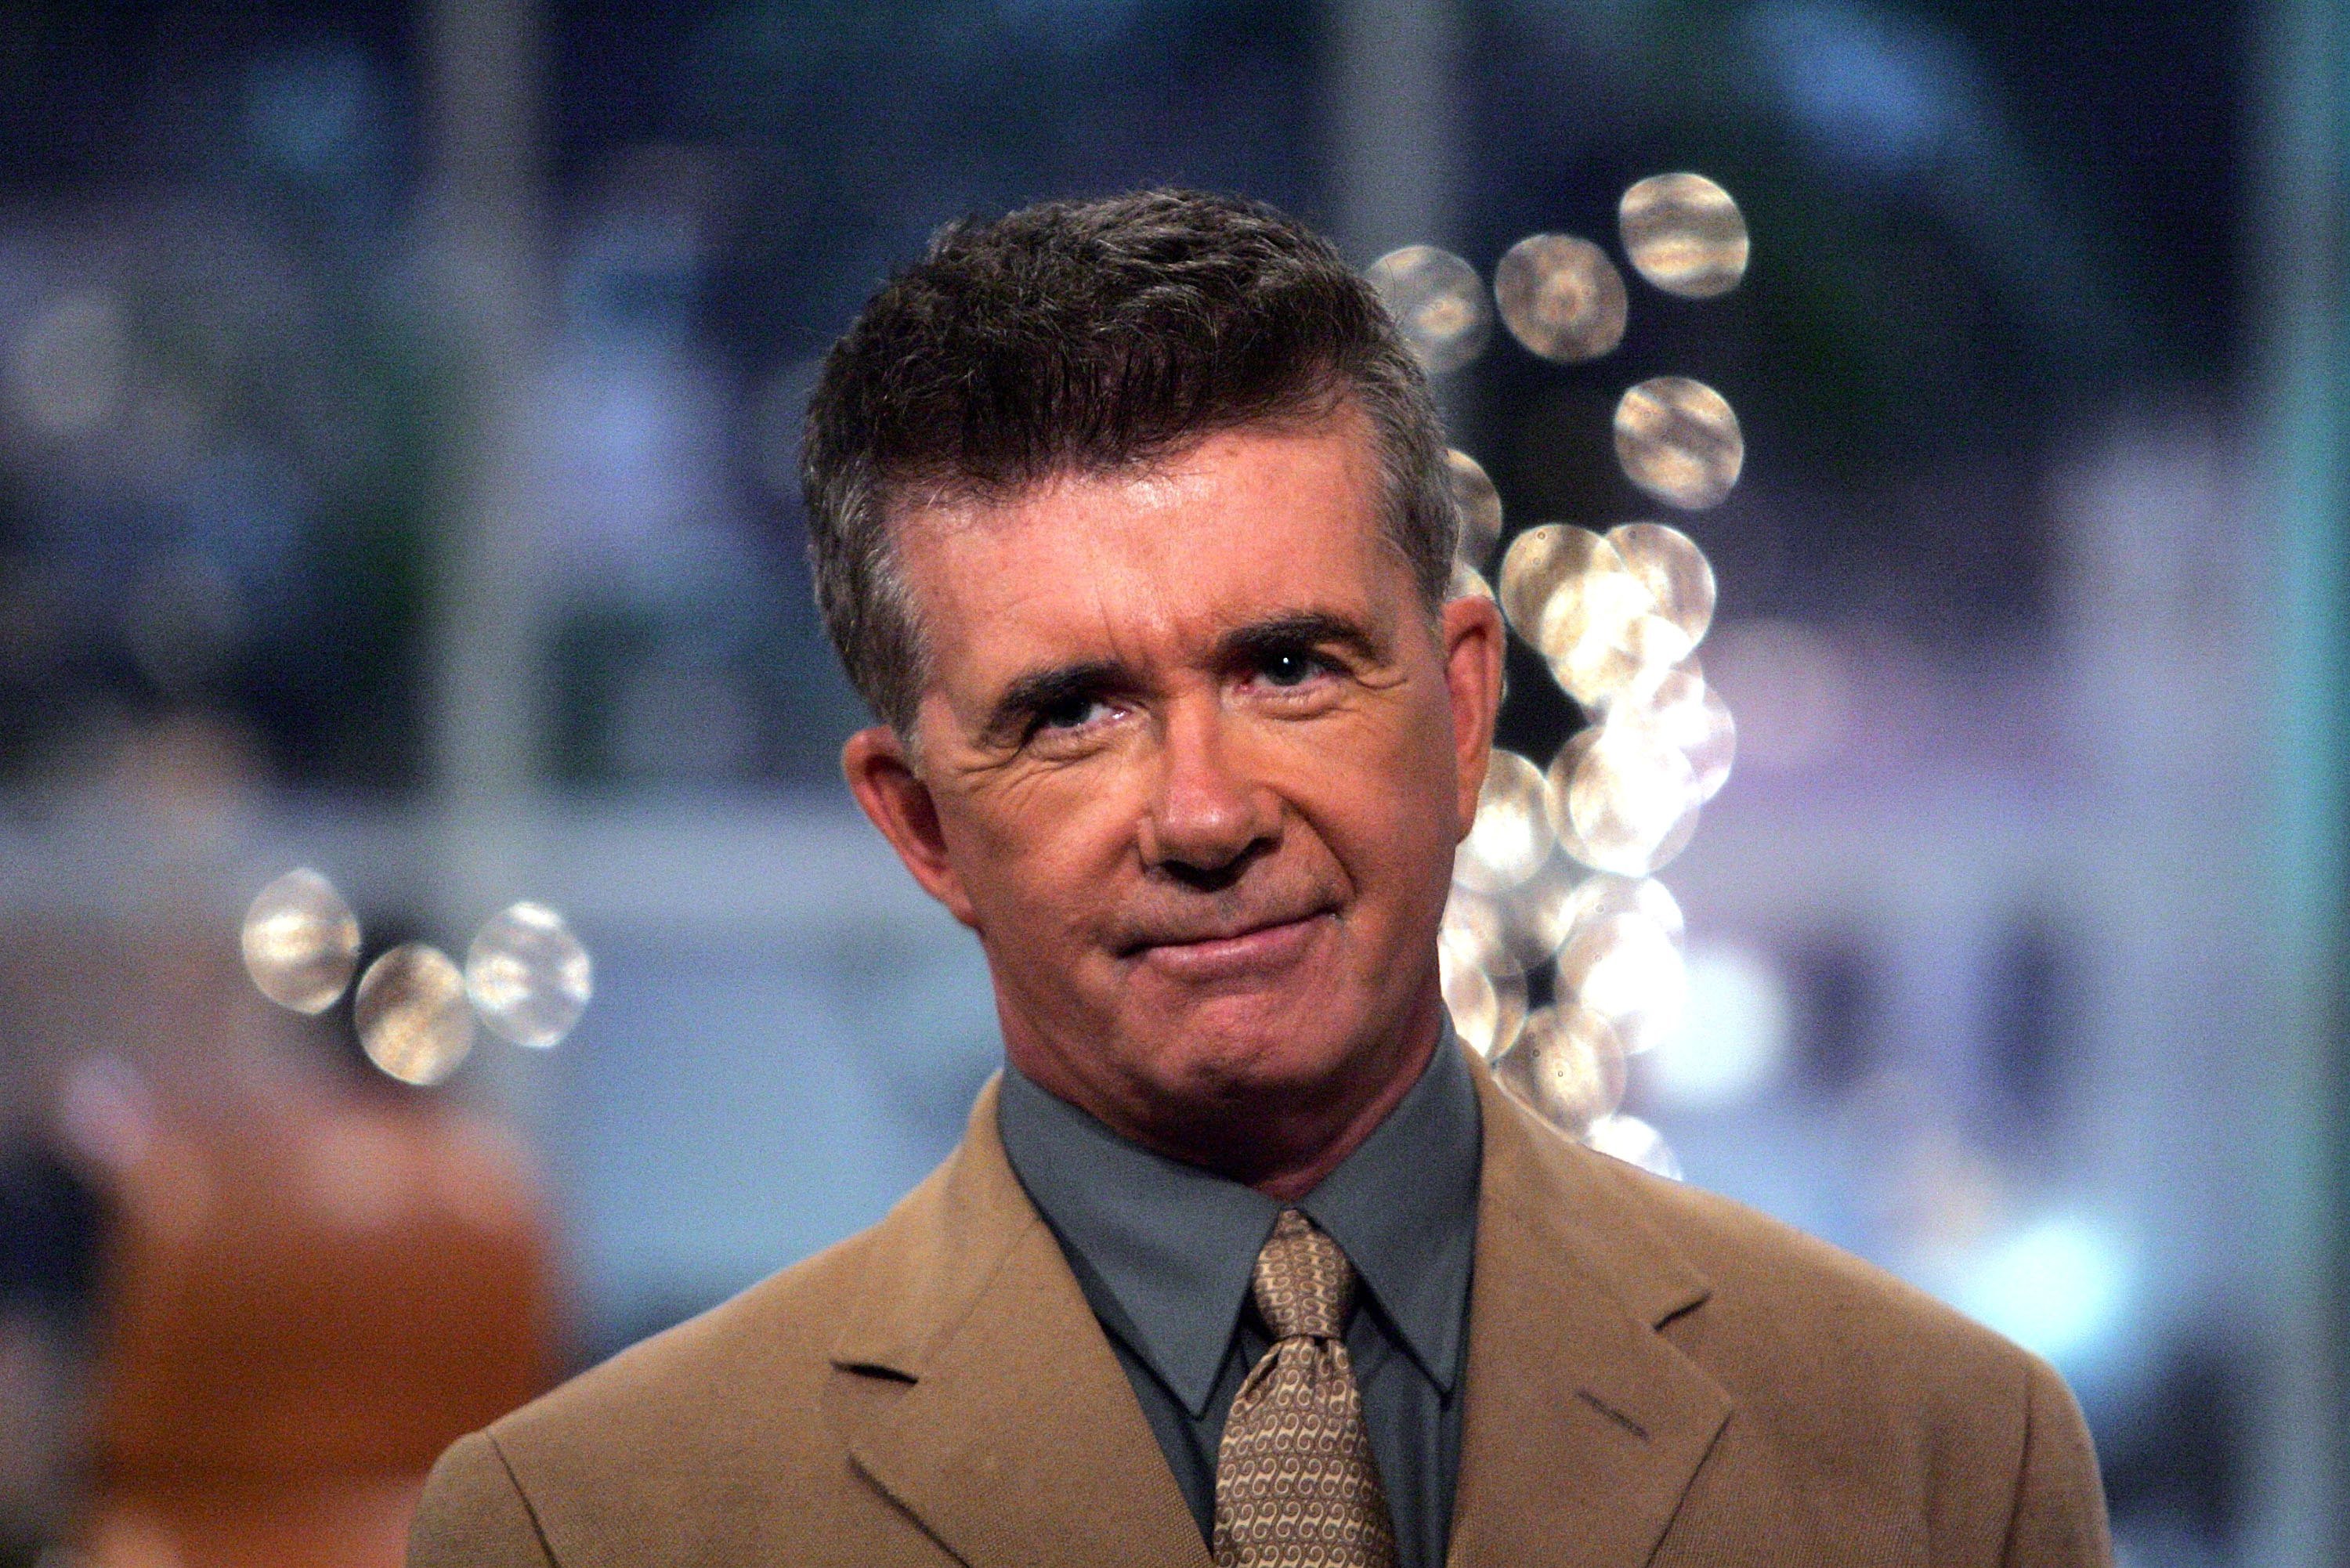 Alan Thicke on "The Bold And The Beautiful" on August 10, 2006 | Source: Getty Images